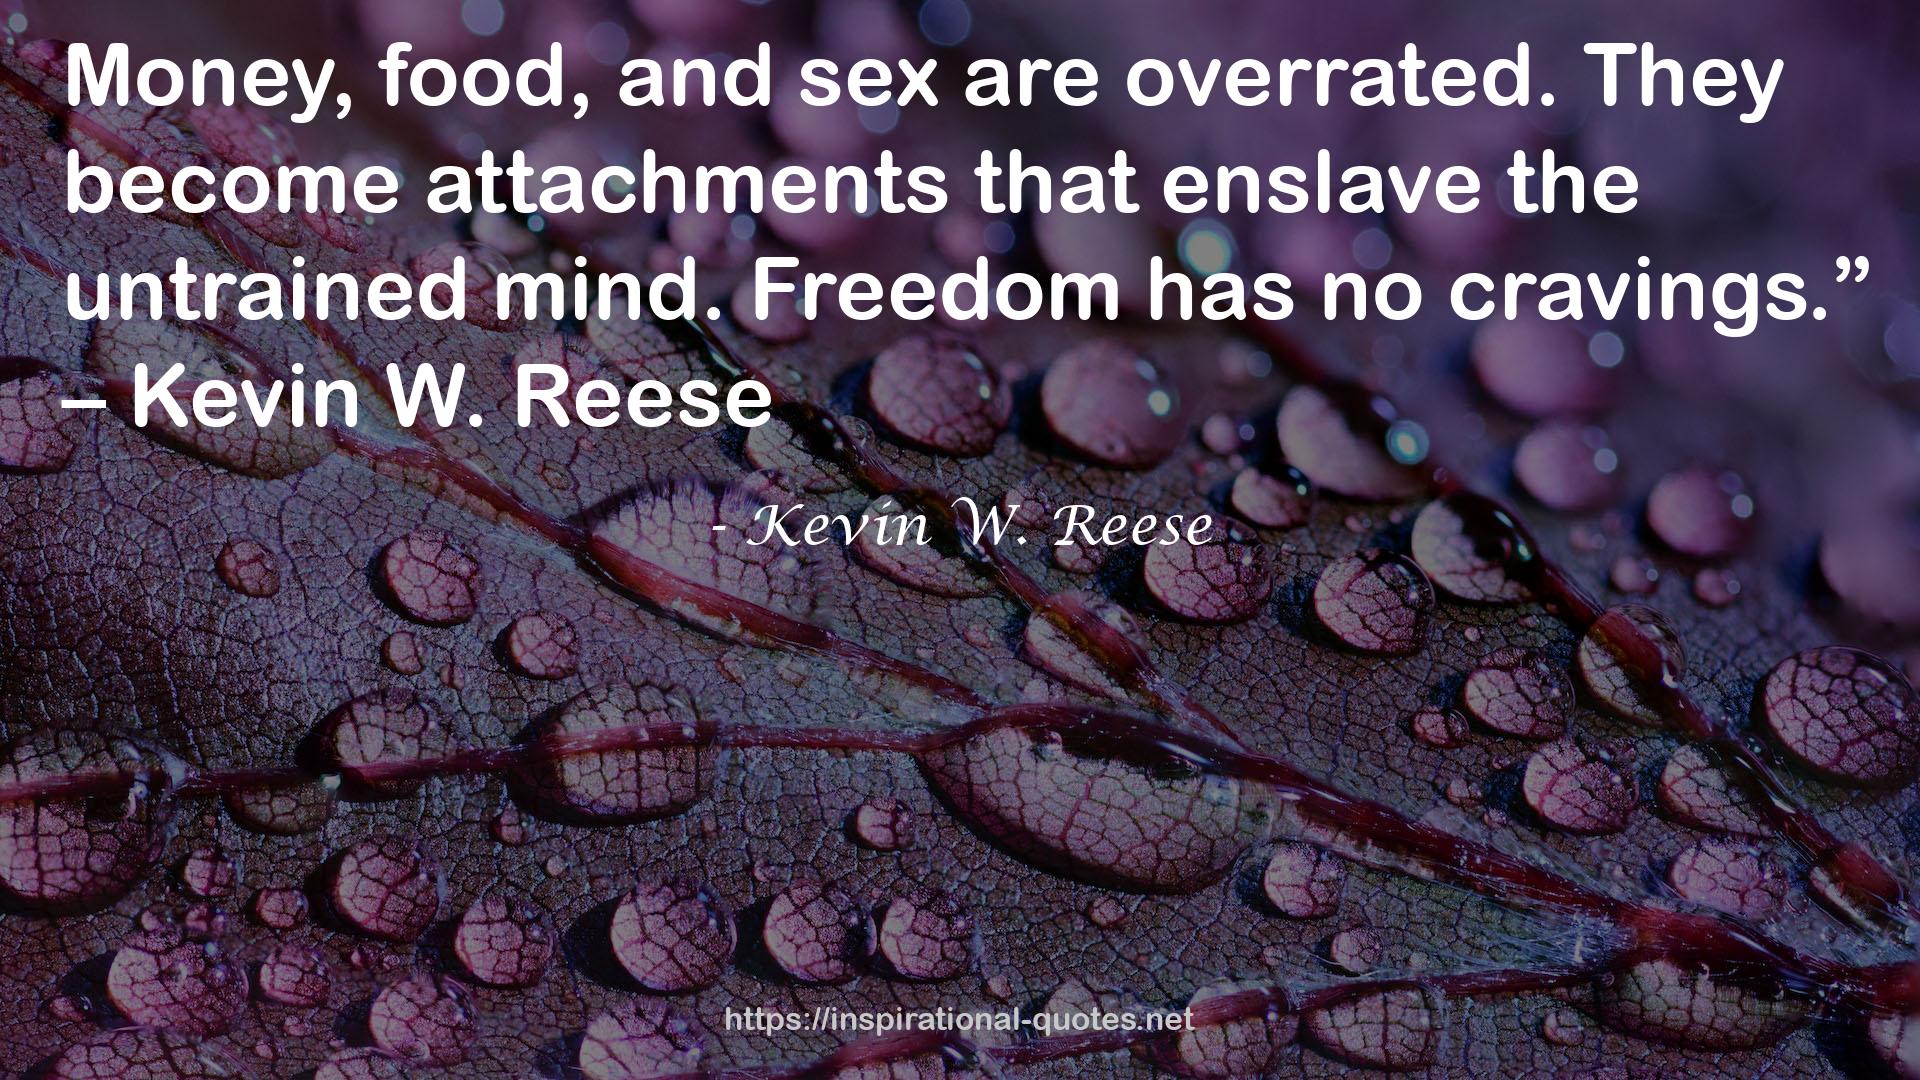 Kevin W. Reese QUOTES